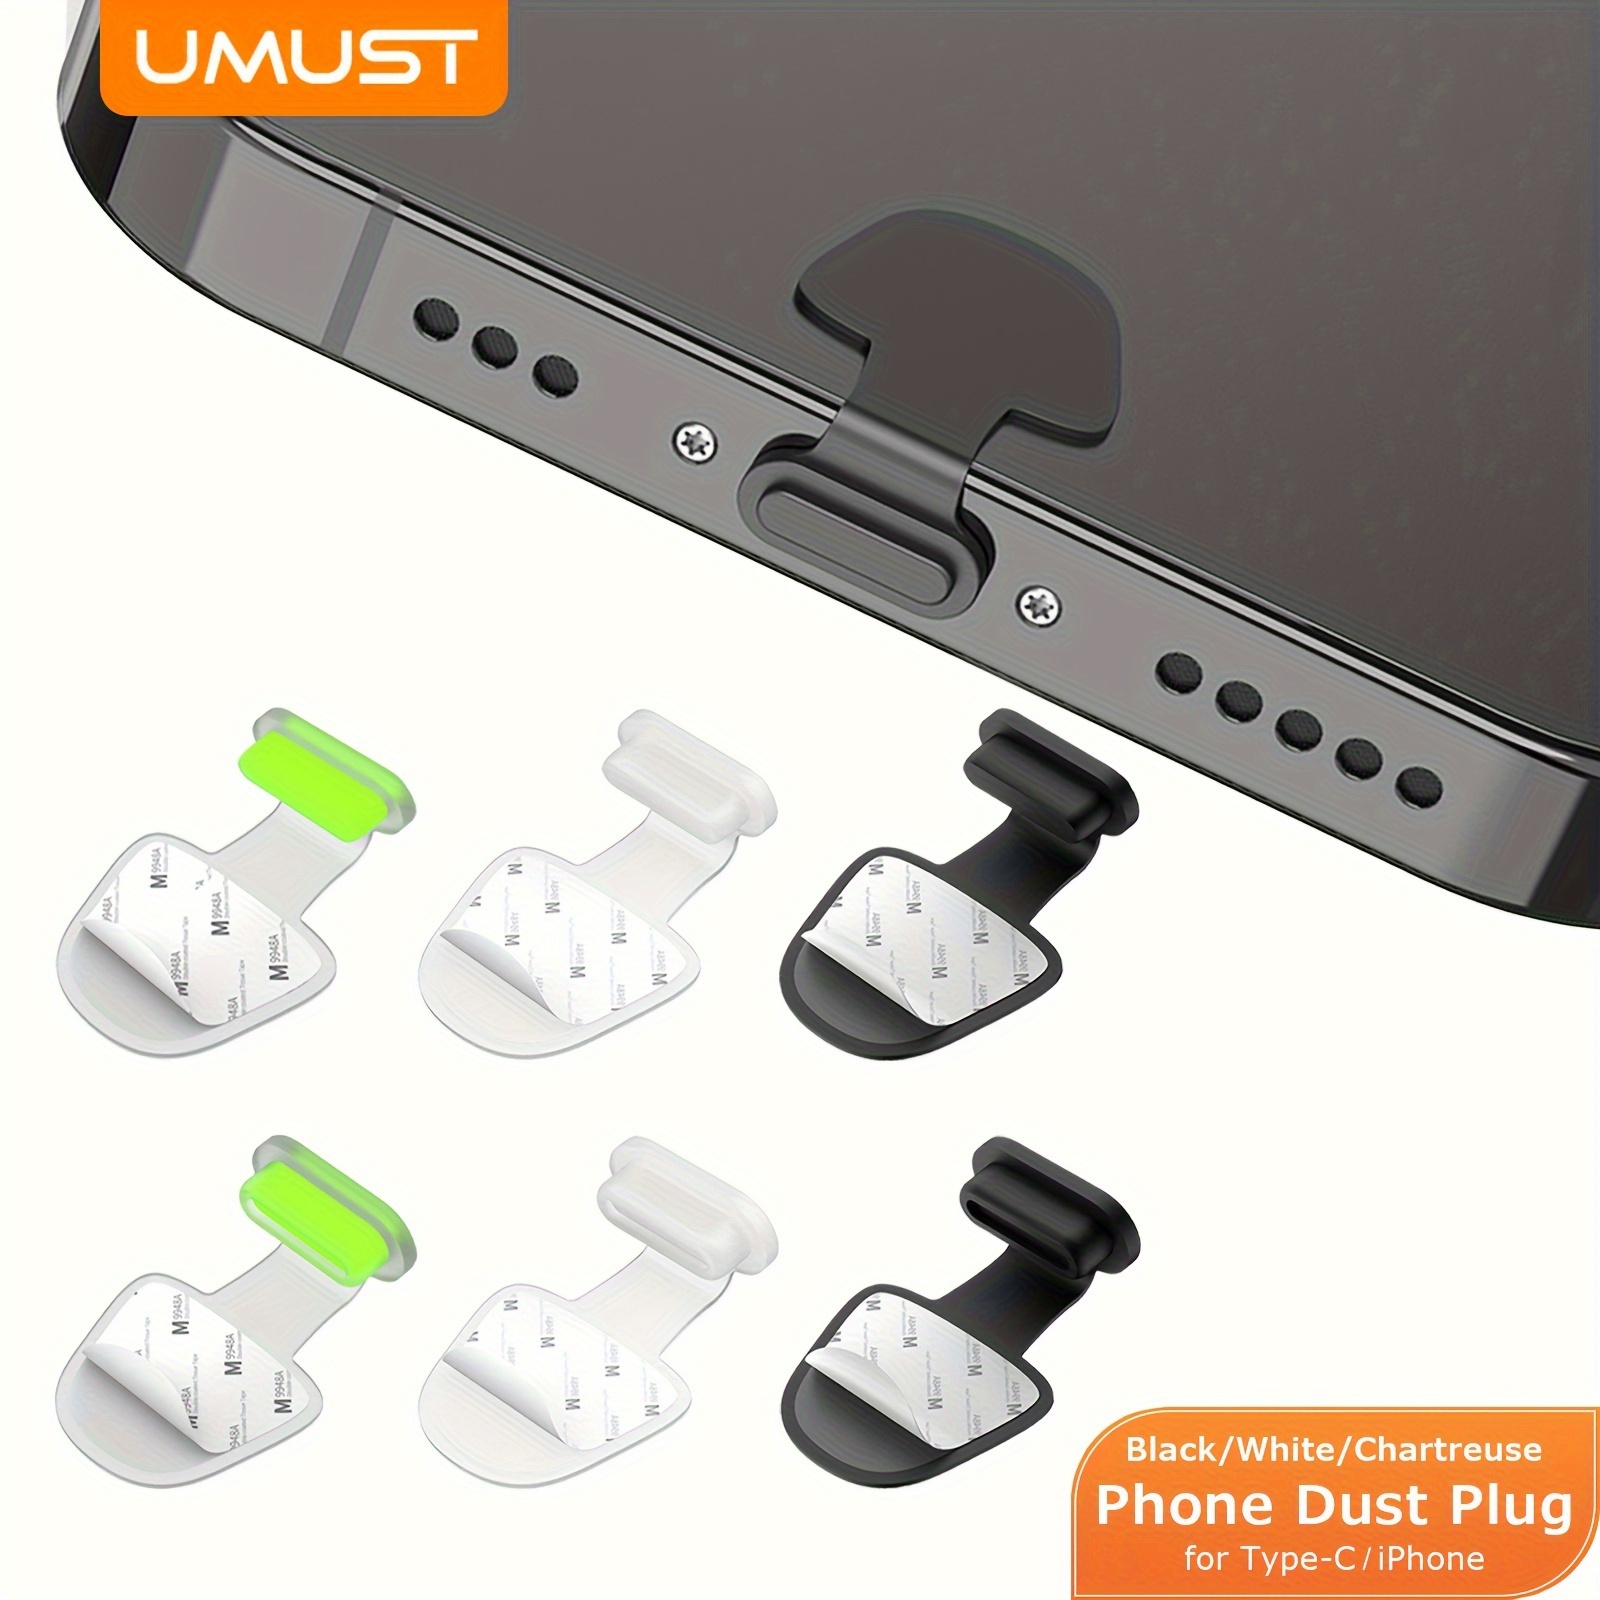 PortPlugs USB C Anti Dust Plugs (10 Pairs) w/Headphone Jack Protector Cover  - Compatible w/Samsung Galaxy, Type C Android Ports, MacBook & More